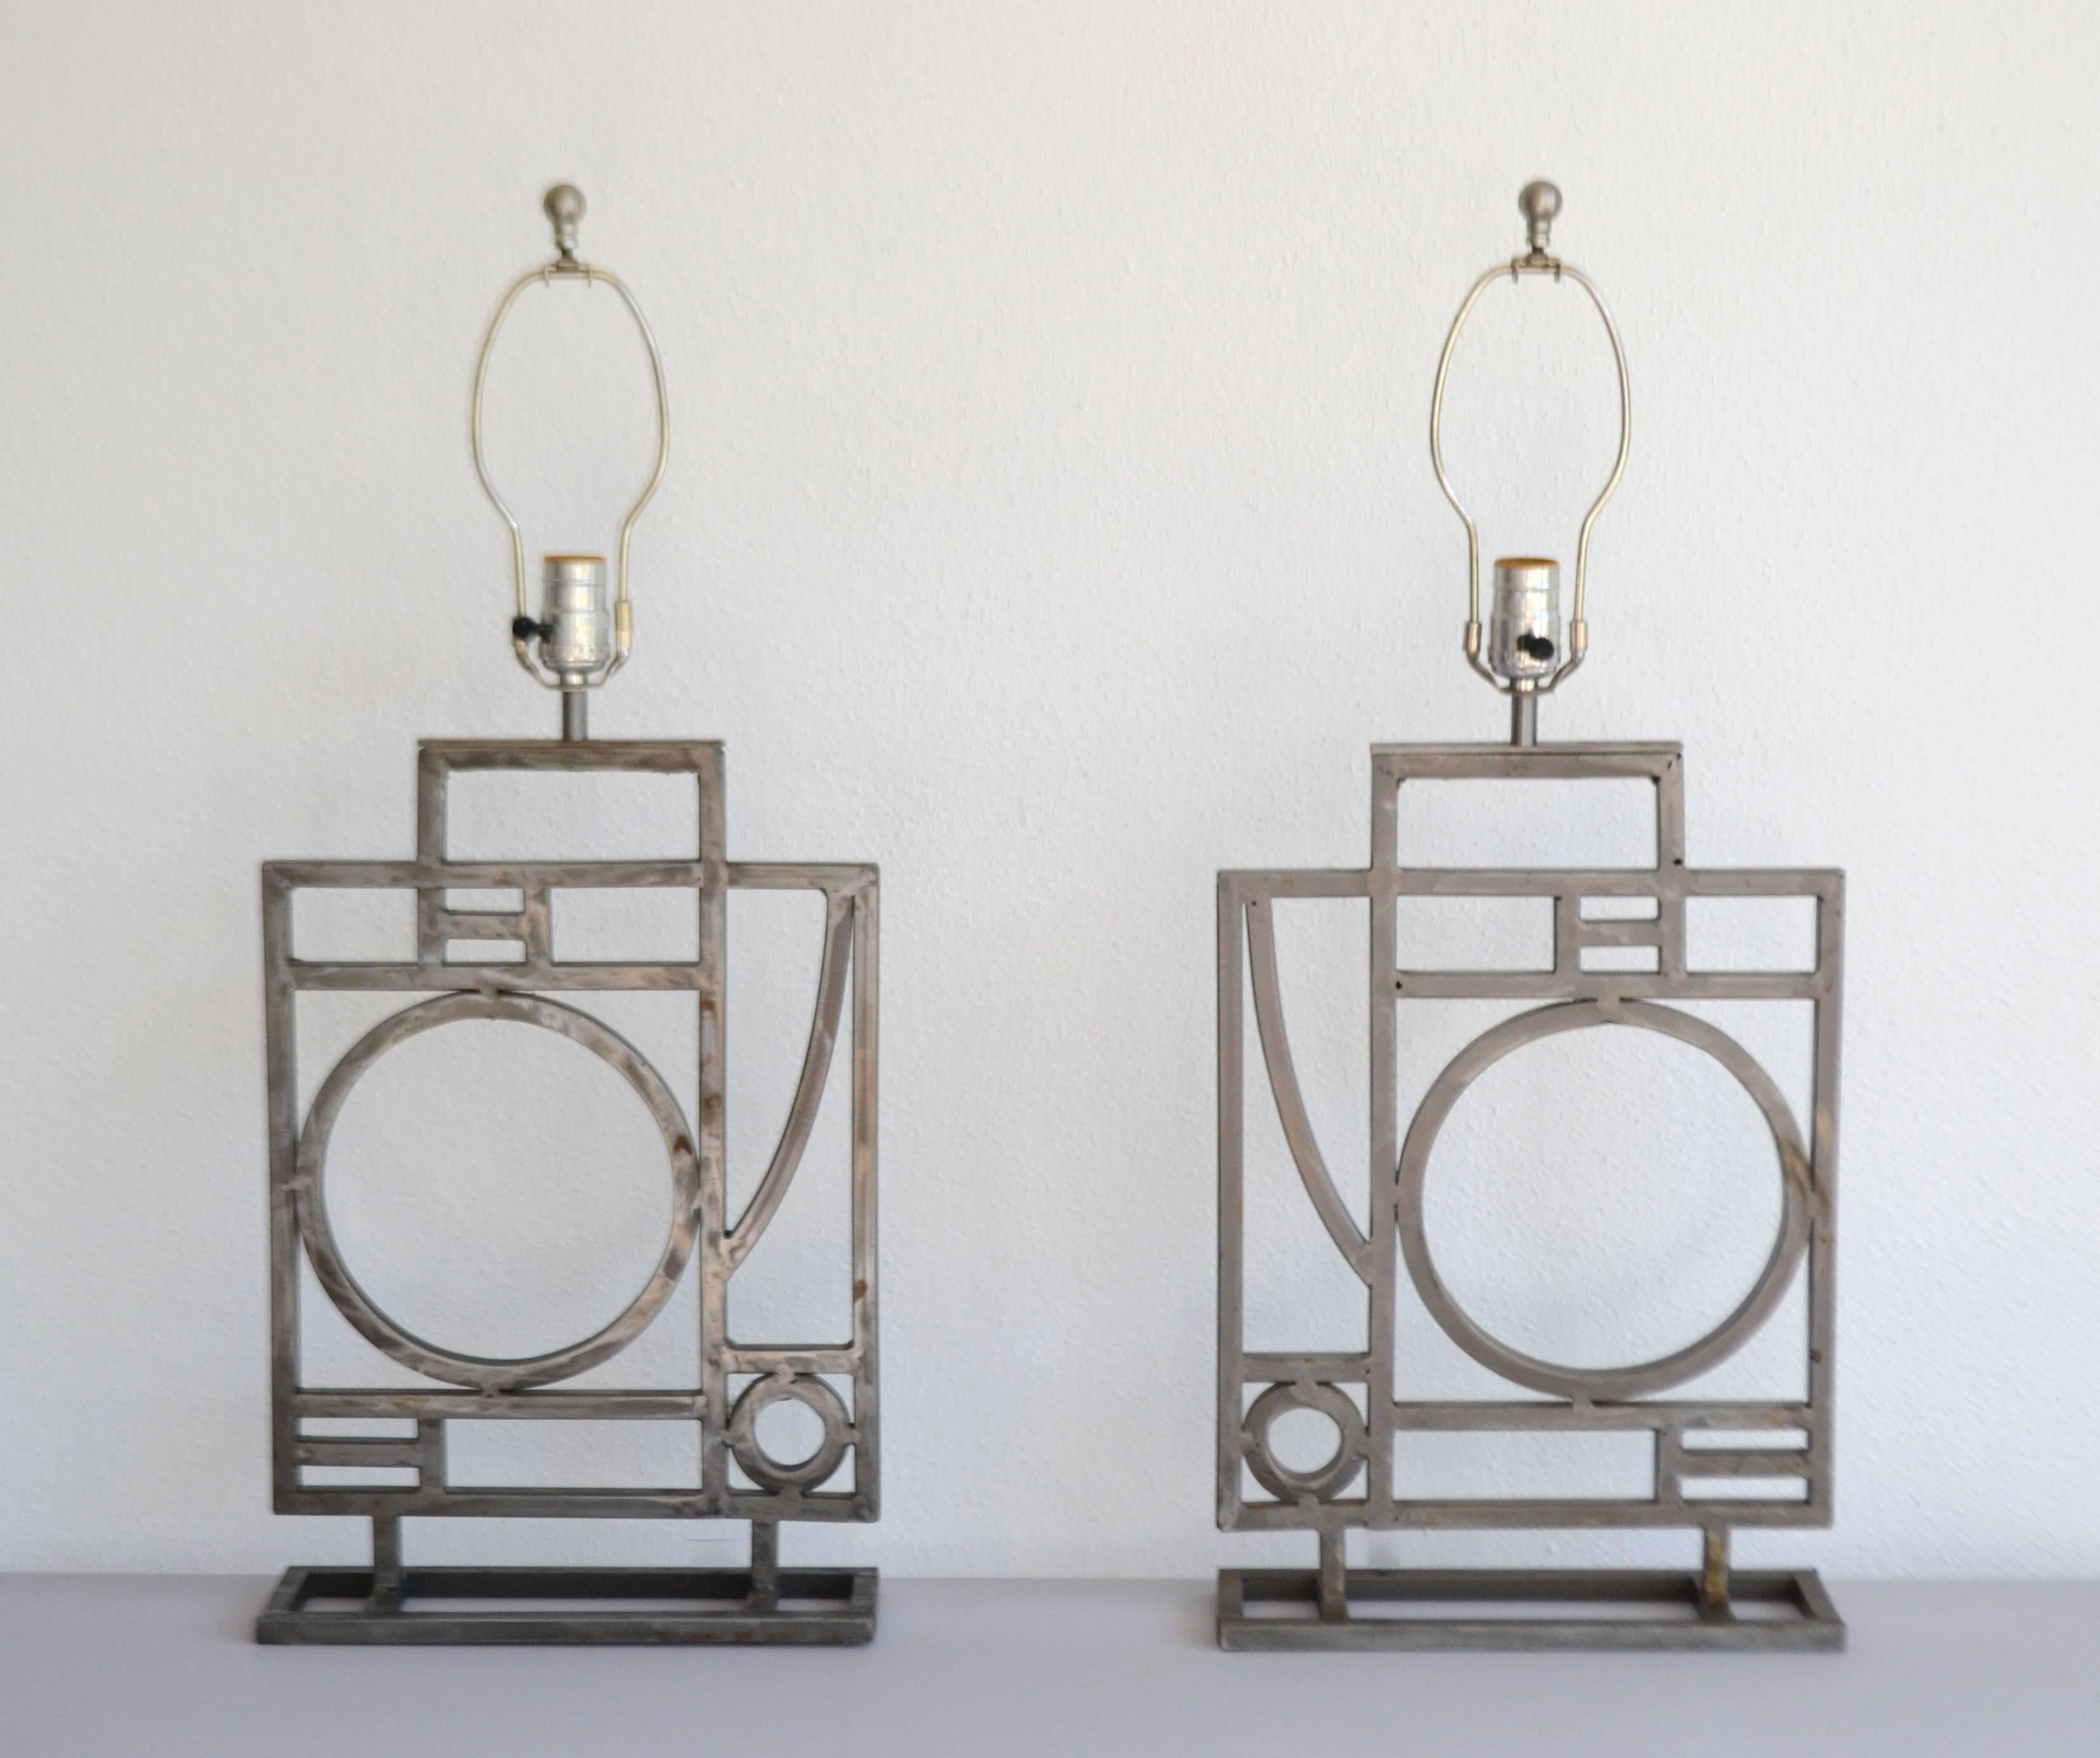 
Stunning pair of brushed metal Postmodern geometrical form table lamps by Robert Sonneman for George Kovacs, circa 1980s-1990.
Shades not included. Measurements:
Height to top of finial is 31.5